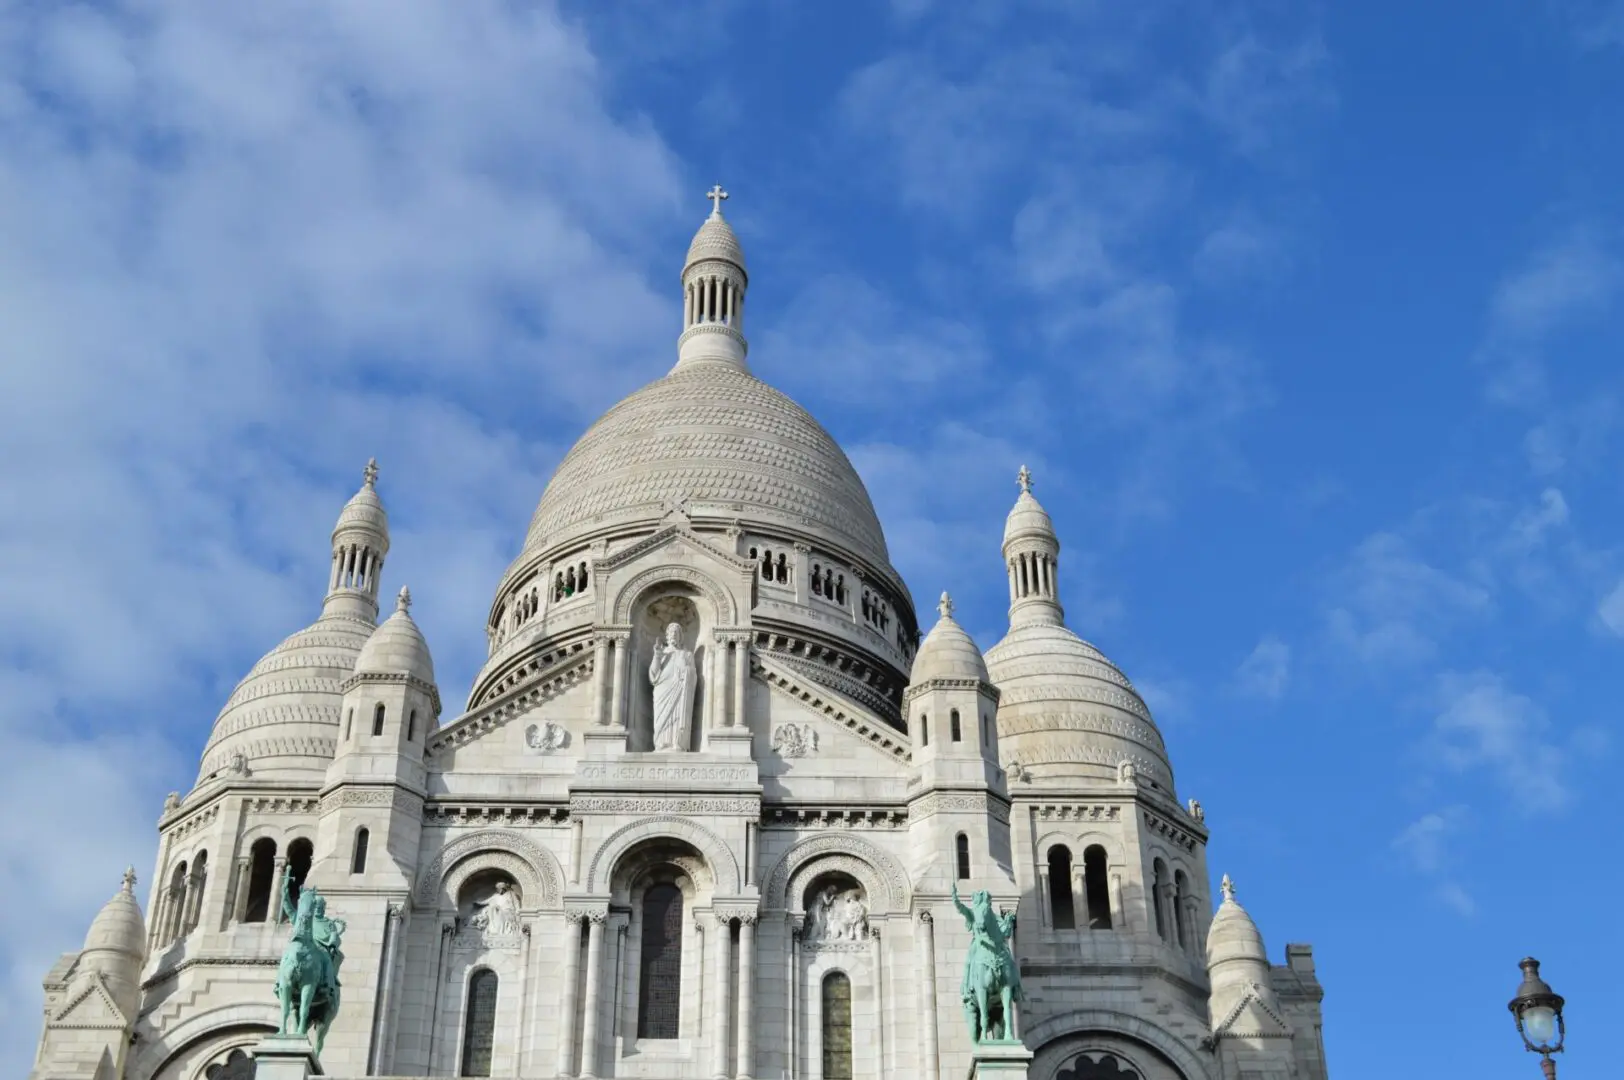 A large building with many domes and statues on it